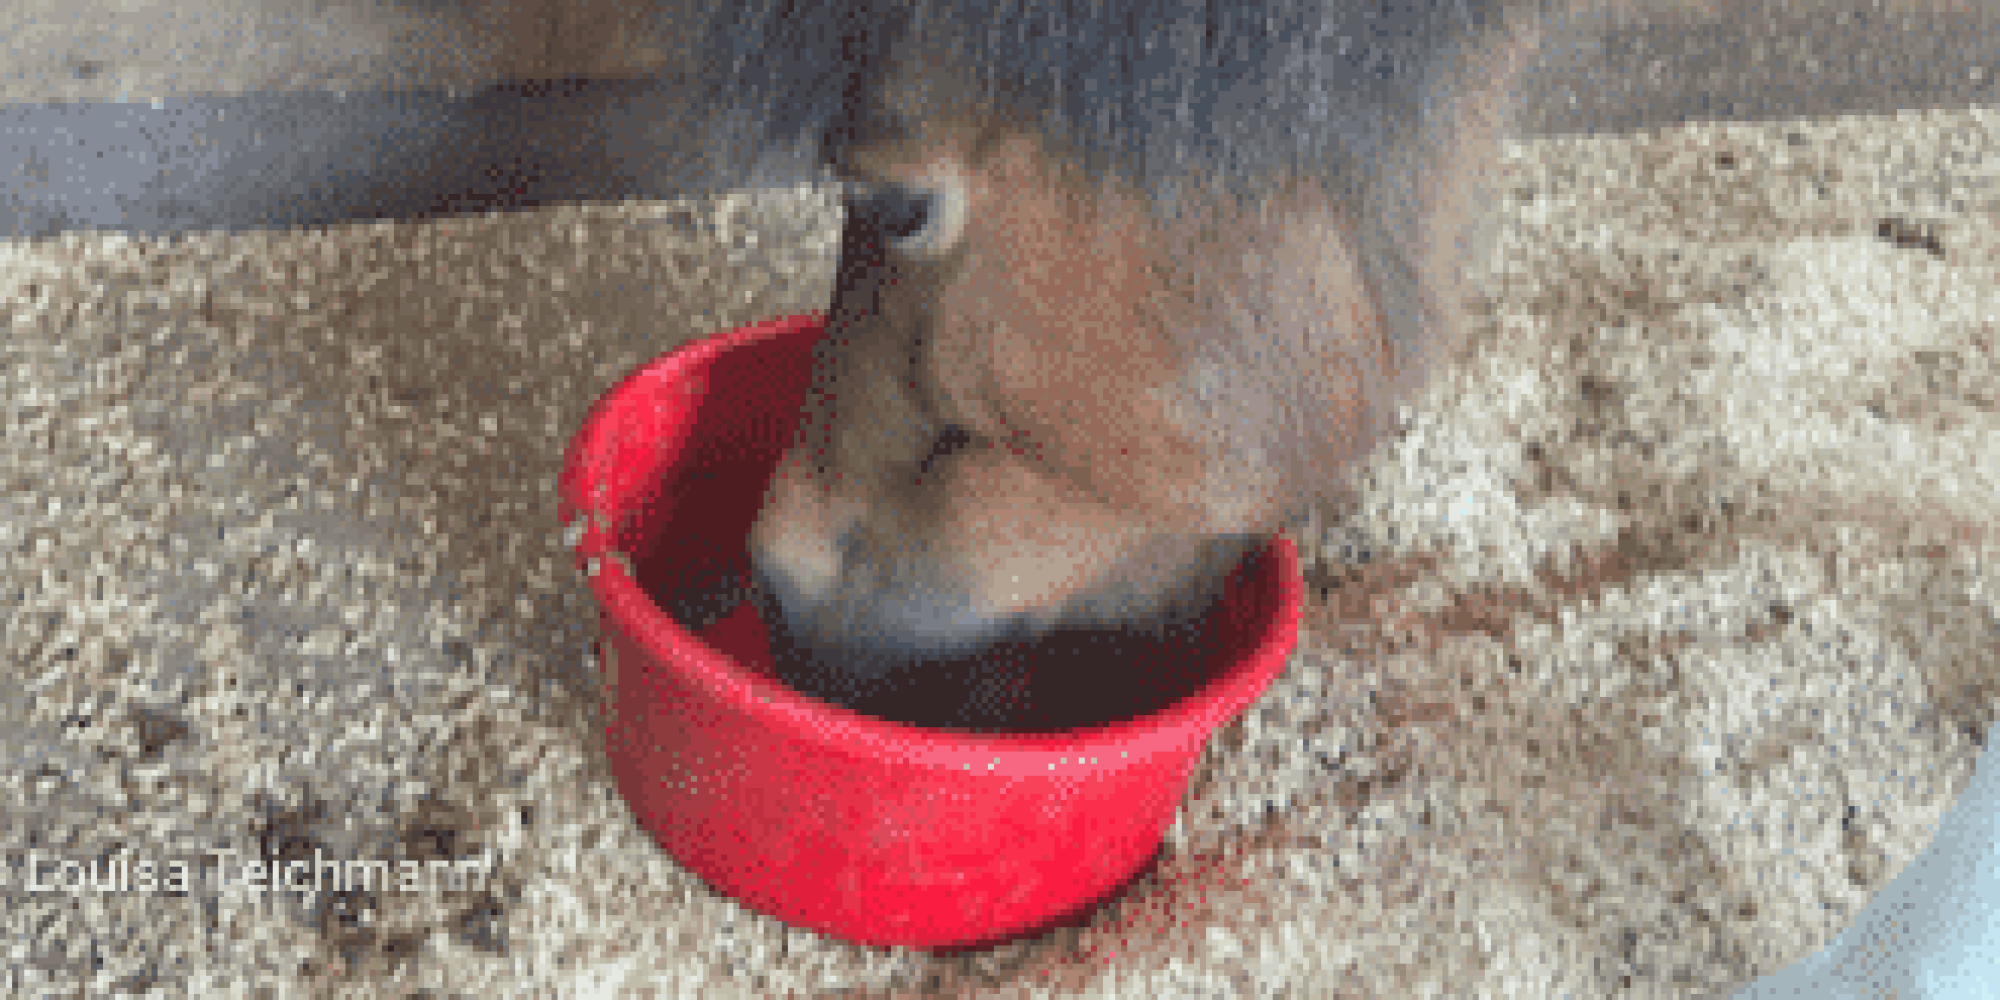 Horse eating out of a red bowl